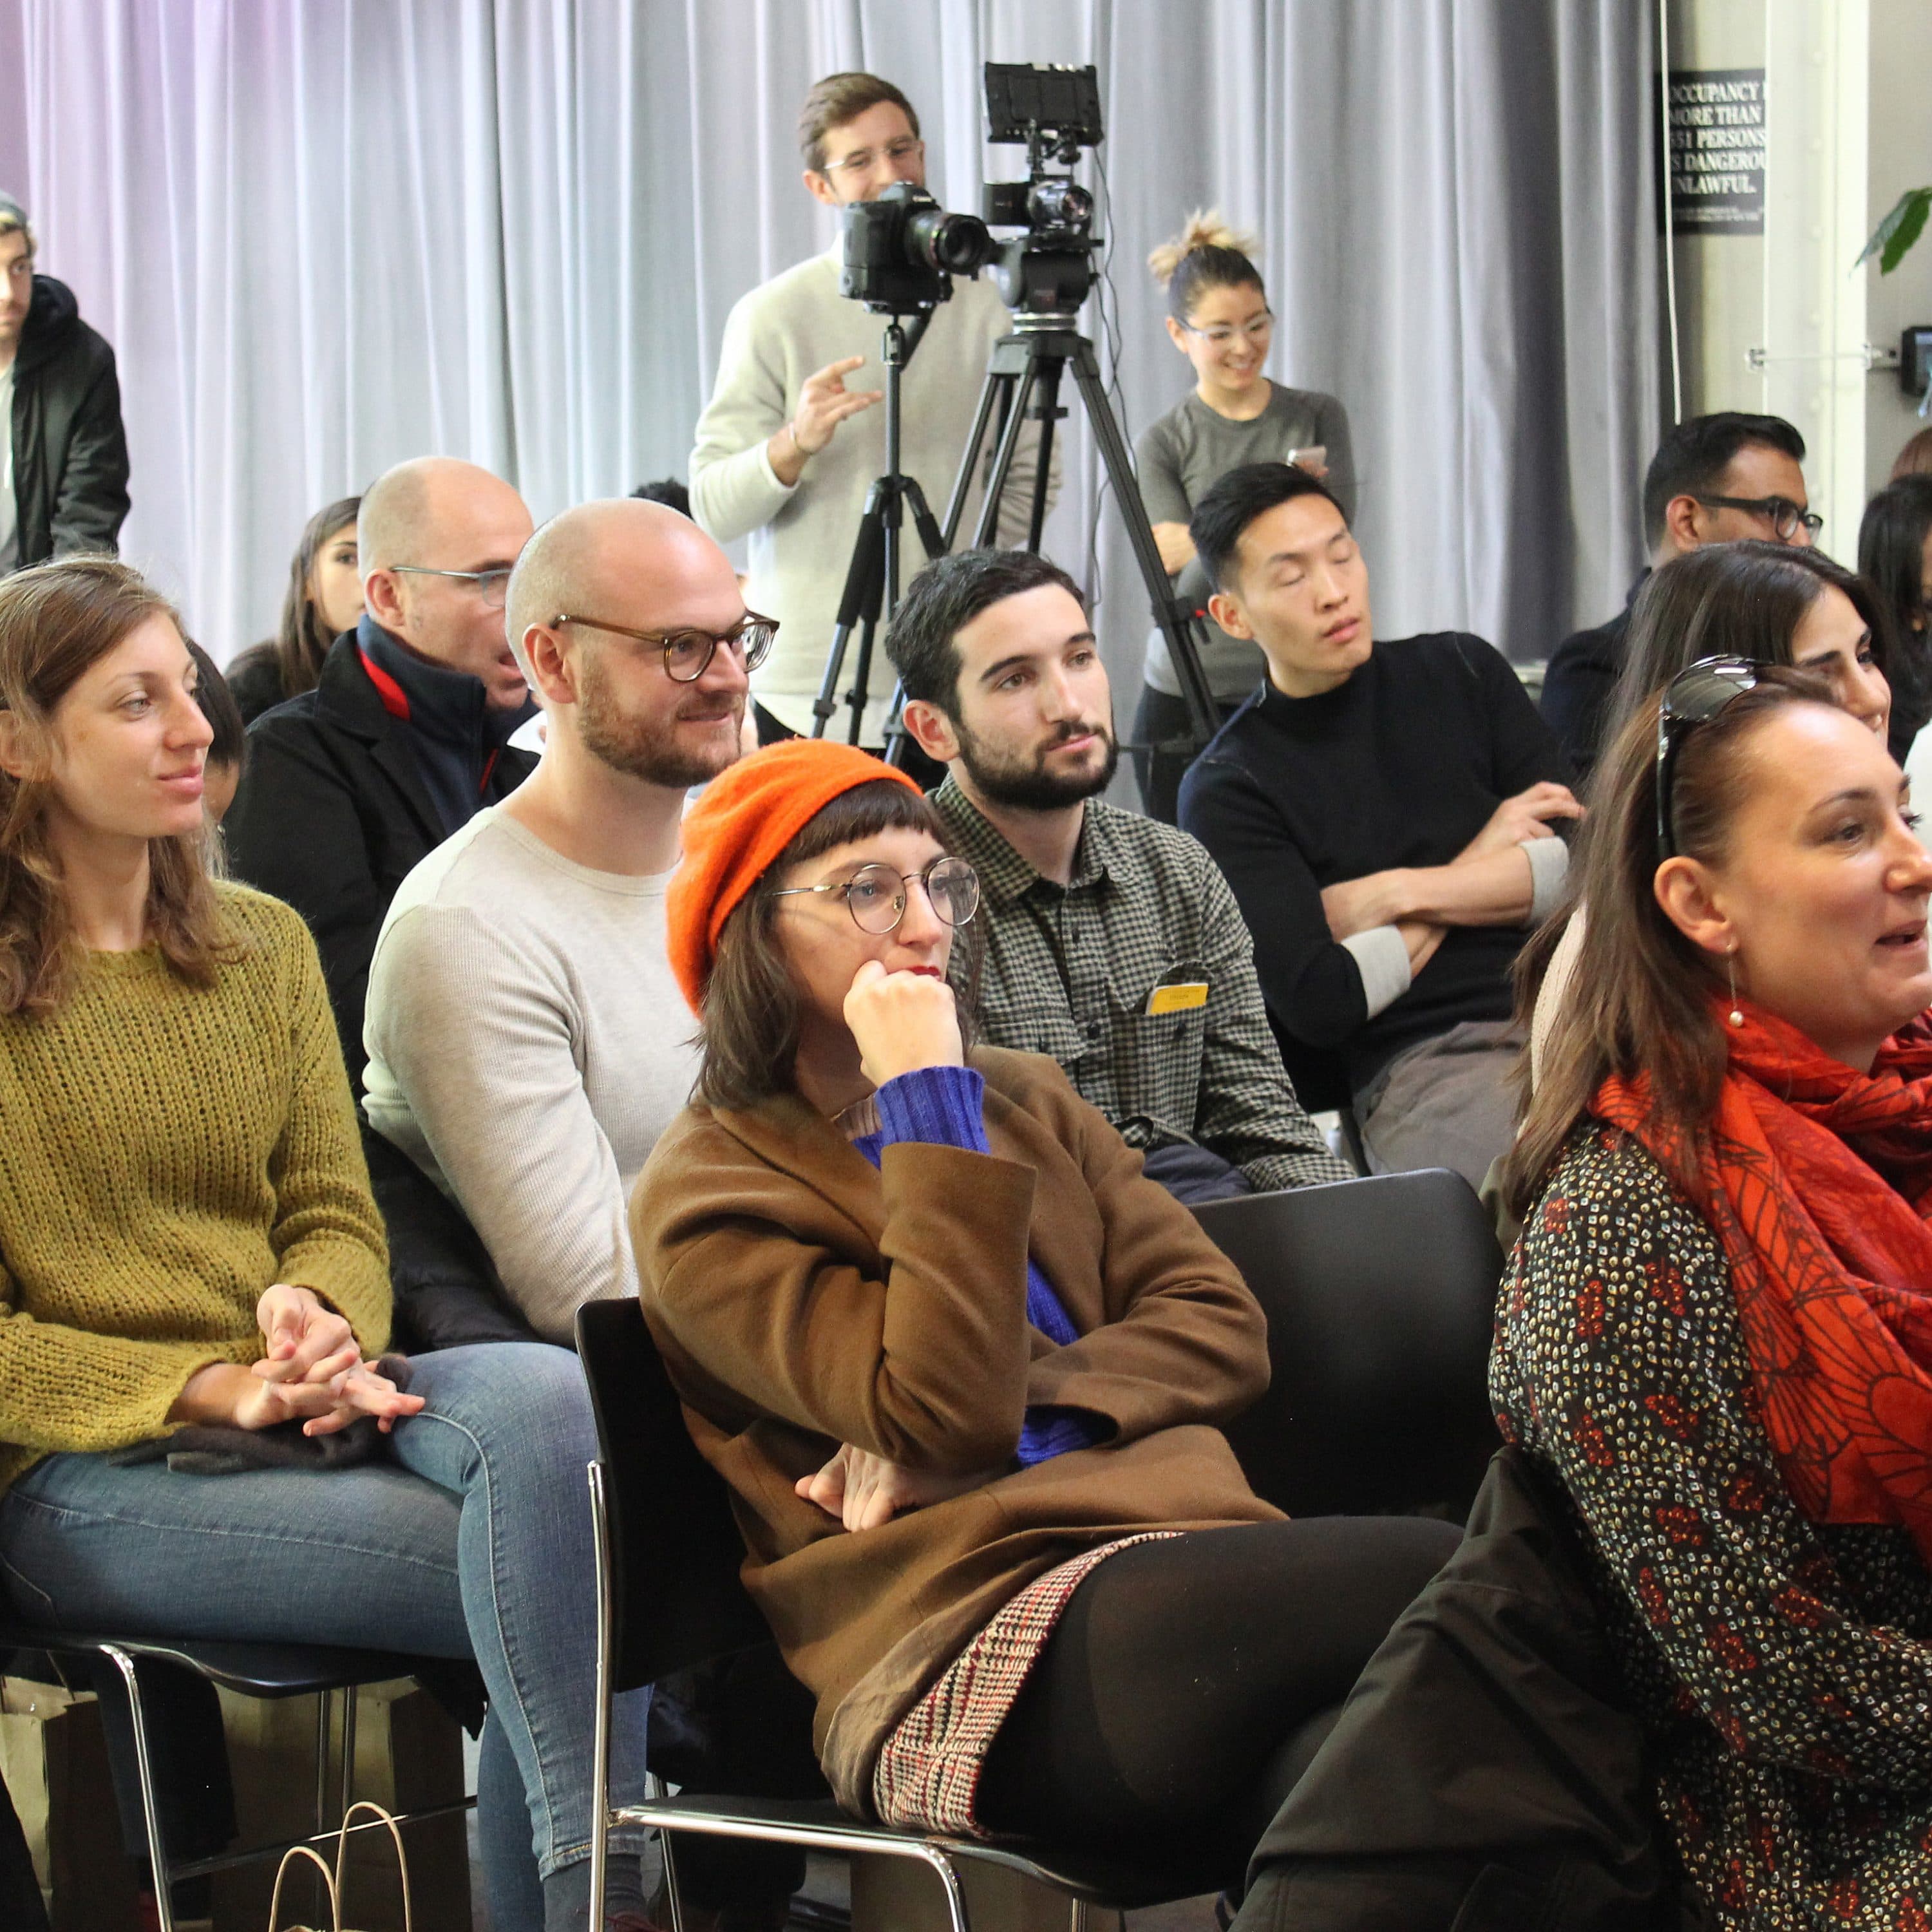 A diverse group of people are seated and attentively watching something out of frame in a well-lit room. Some are smiling or deep in thought. There is a person with a camera on a tripod in the background and a large plant to the right. The atmosphere appears casual and engaged.